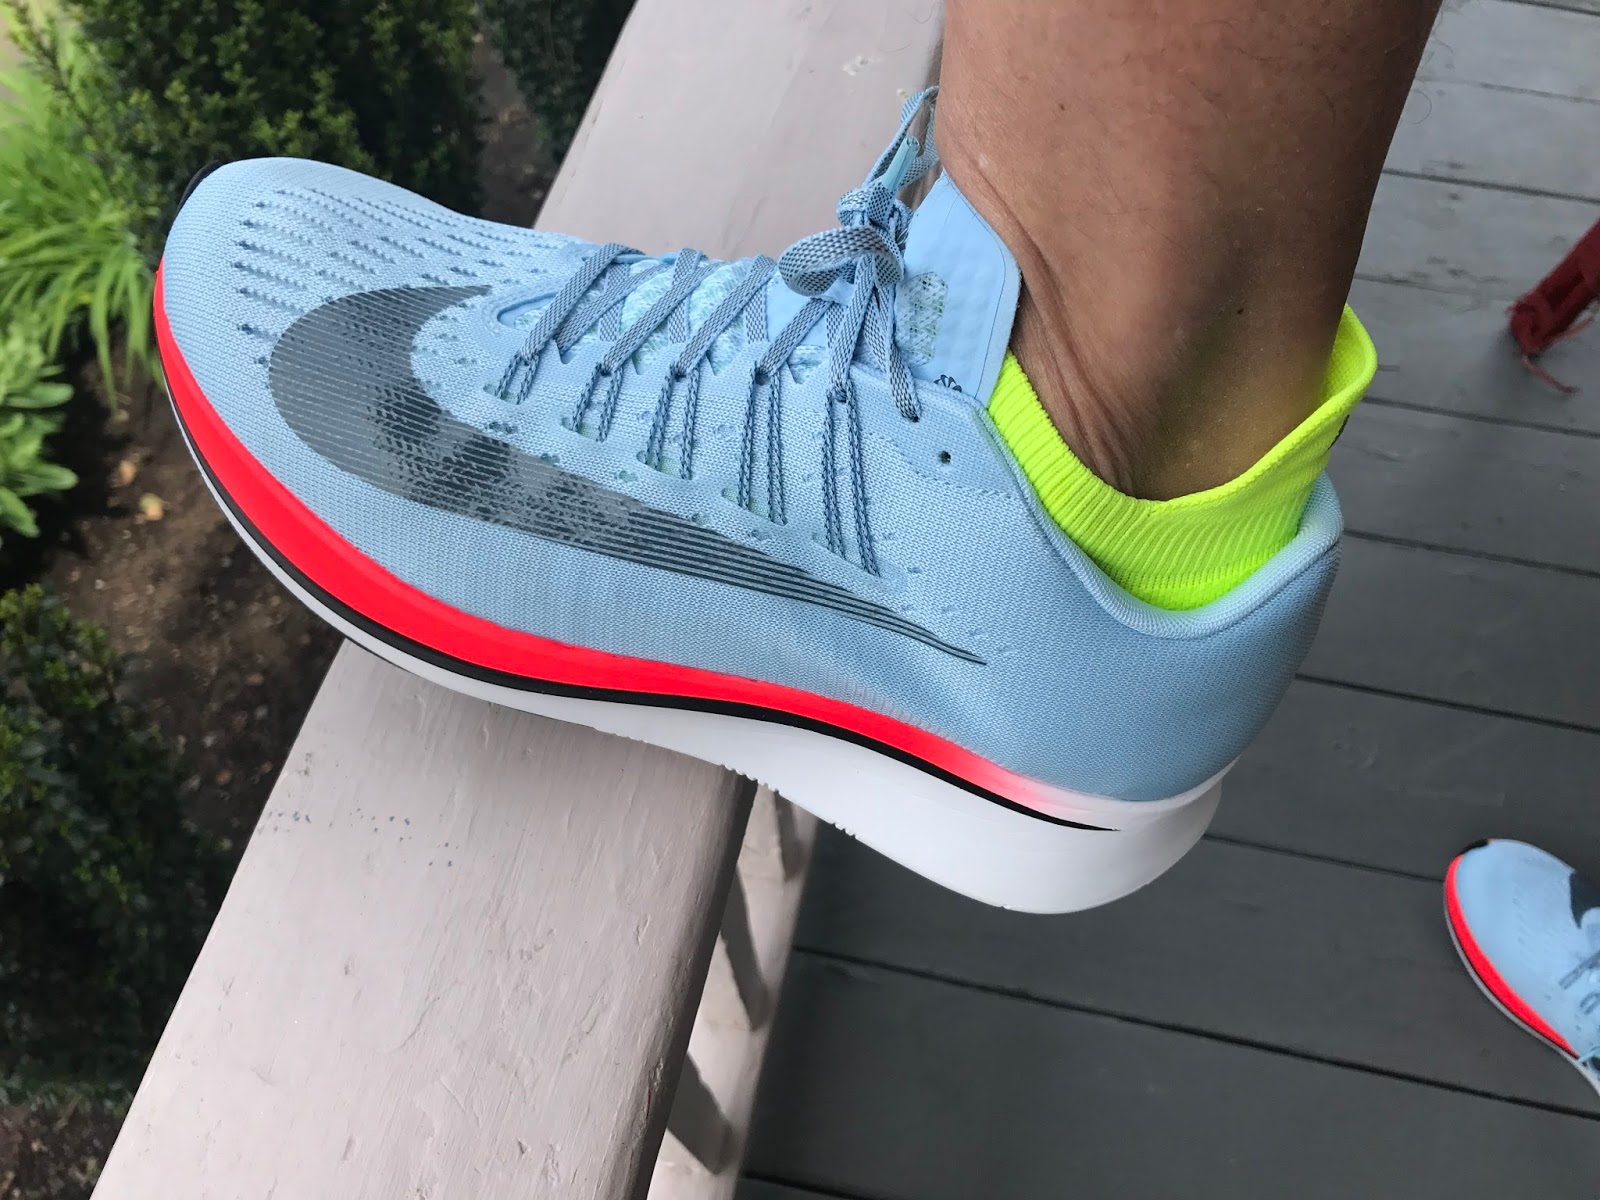 Trail Run: Nike Zoom Fly First Run Impressions Review: Good Form Required! Light, Well Cushioned, Great Upper and Stiff.